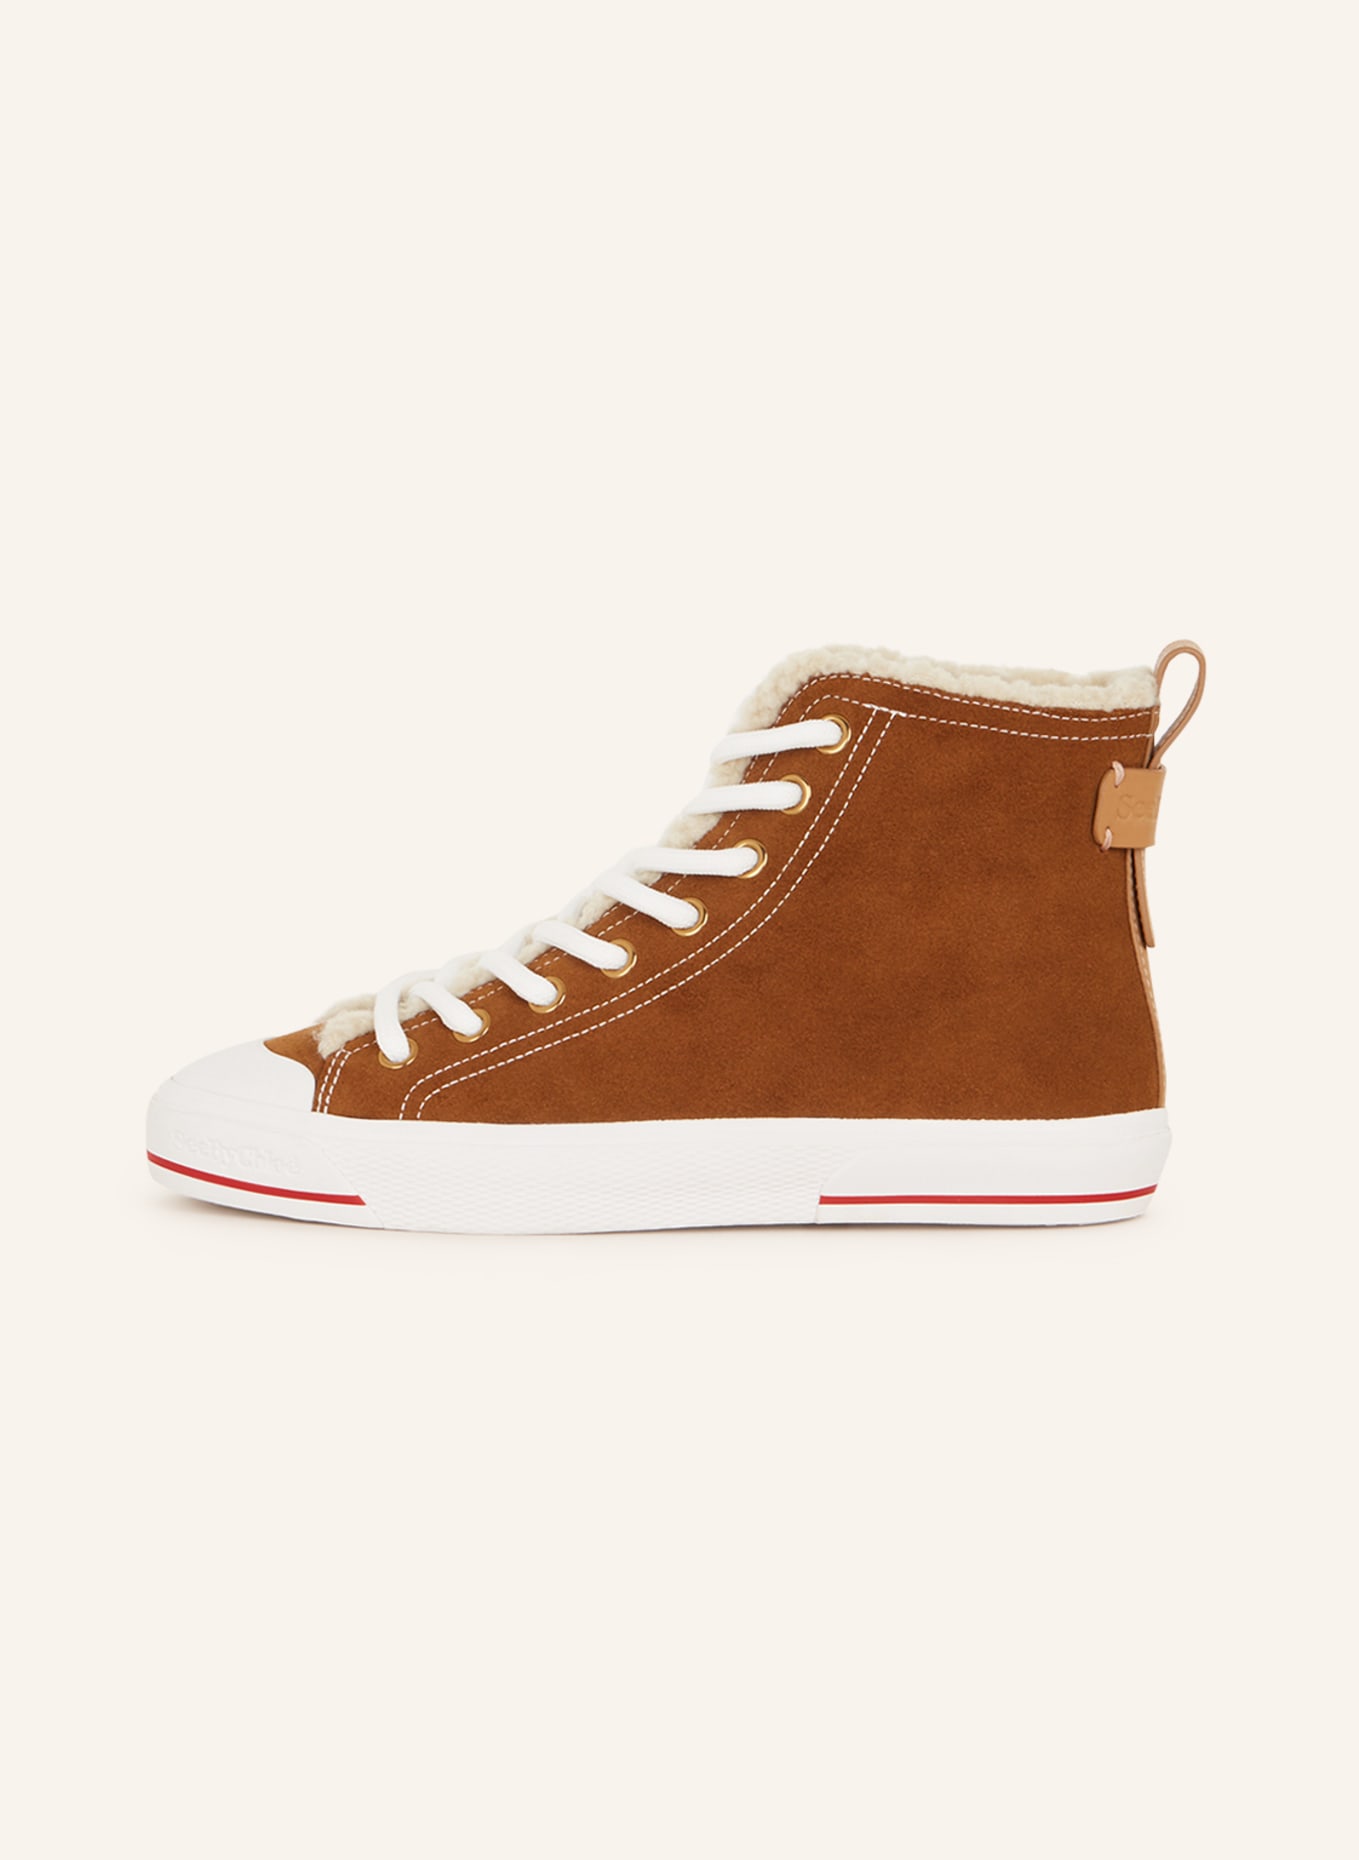 SEE BY CHLOÉ High-top sneakers ARYANA, Color: 506/123 Tobacco-Fabric Pu (Image 4)